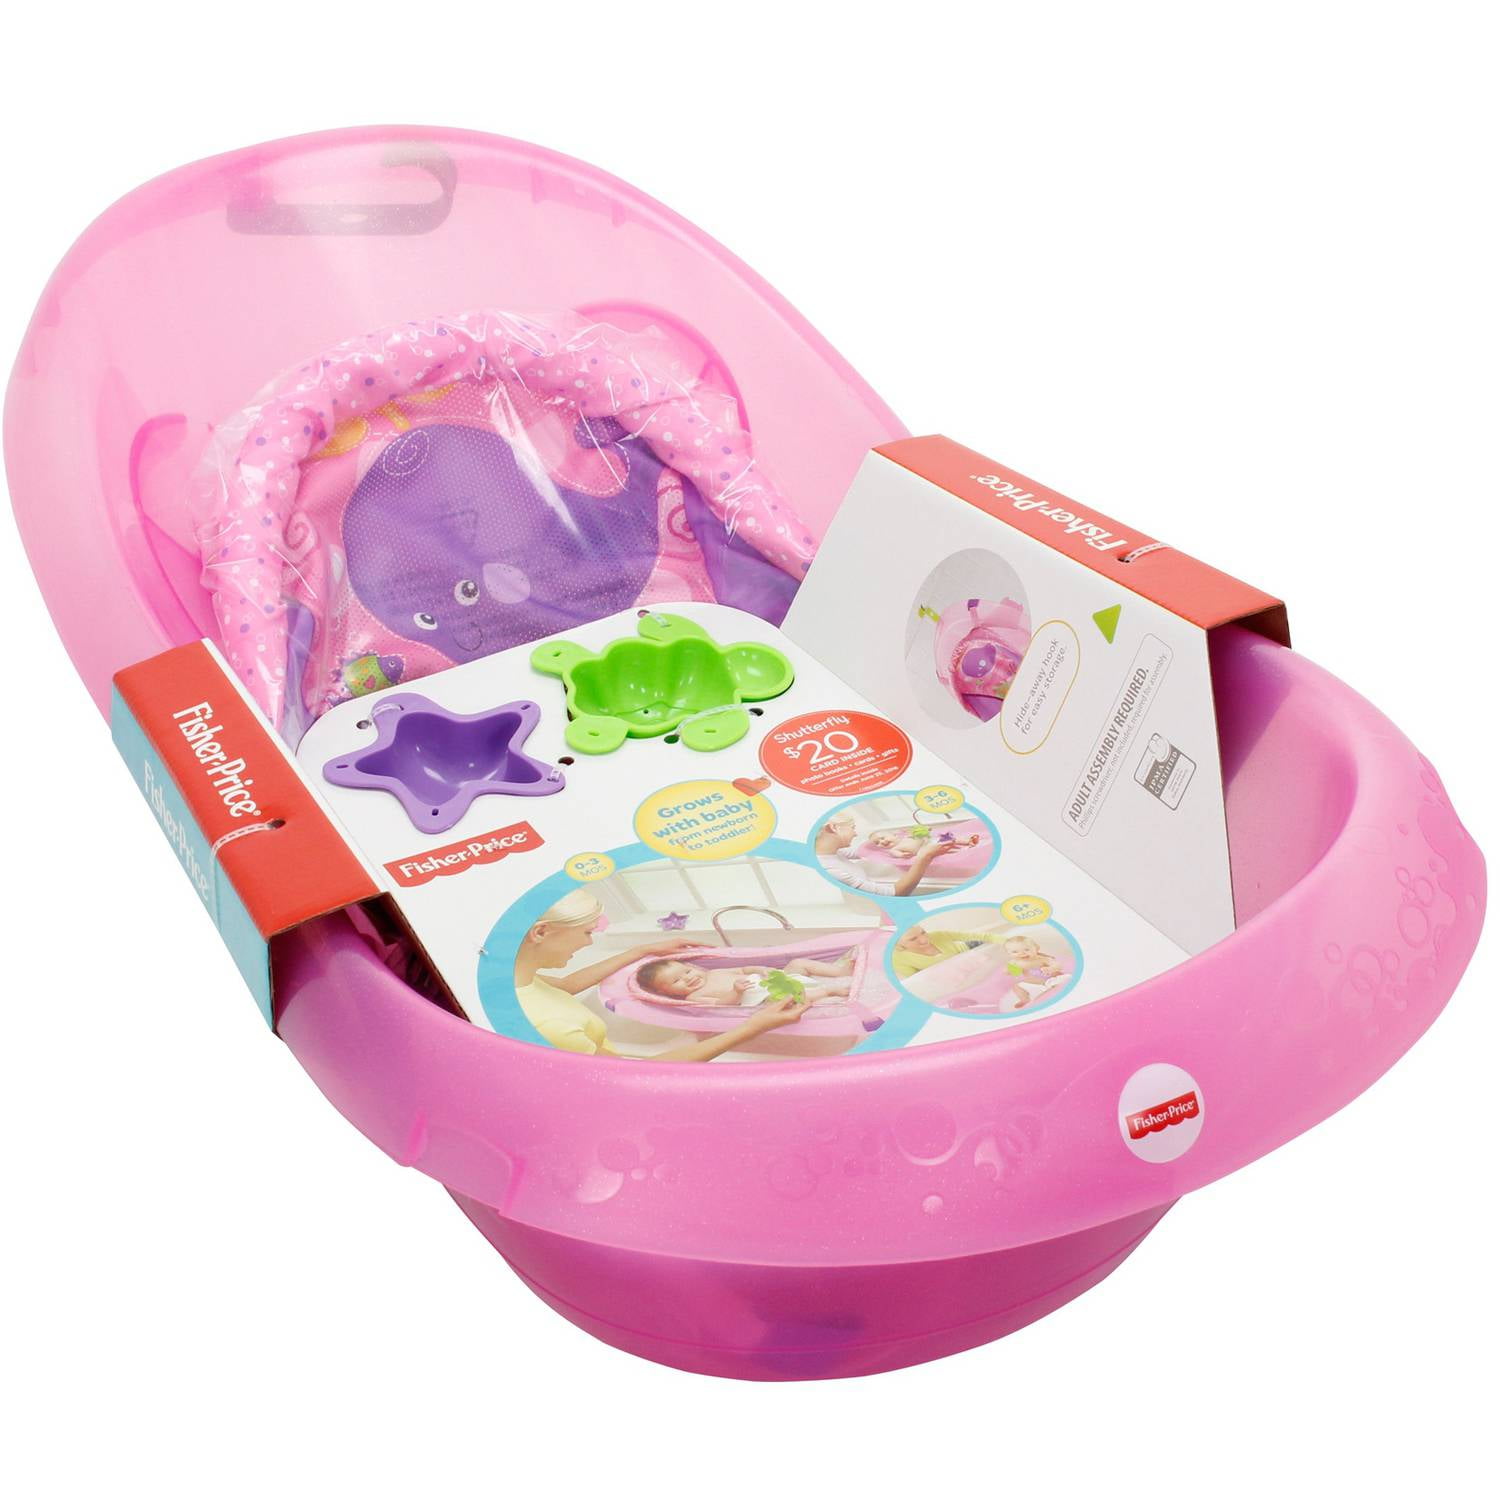 fisher price baby bath toys